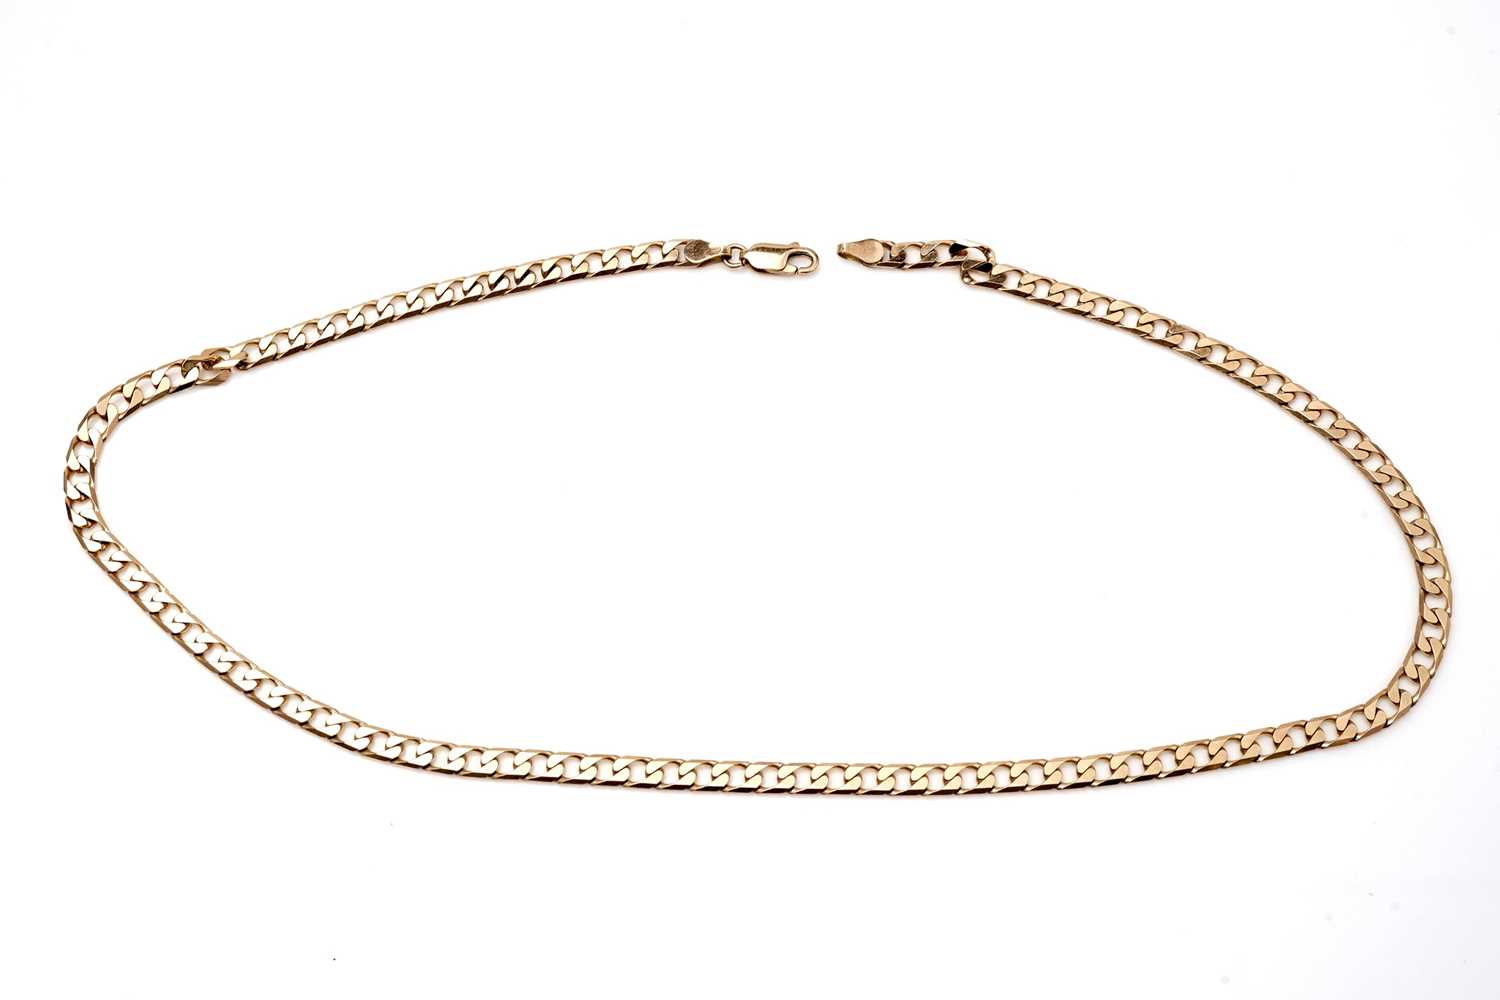 Lot 432 - A 9ct yellow gold curb link necklace chain